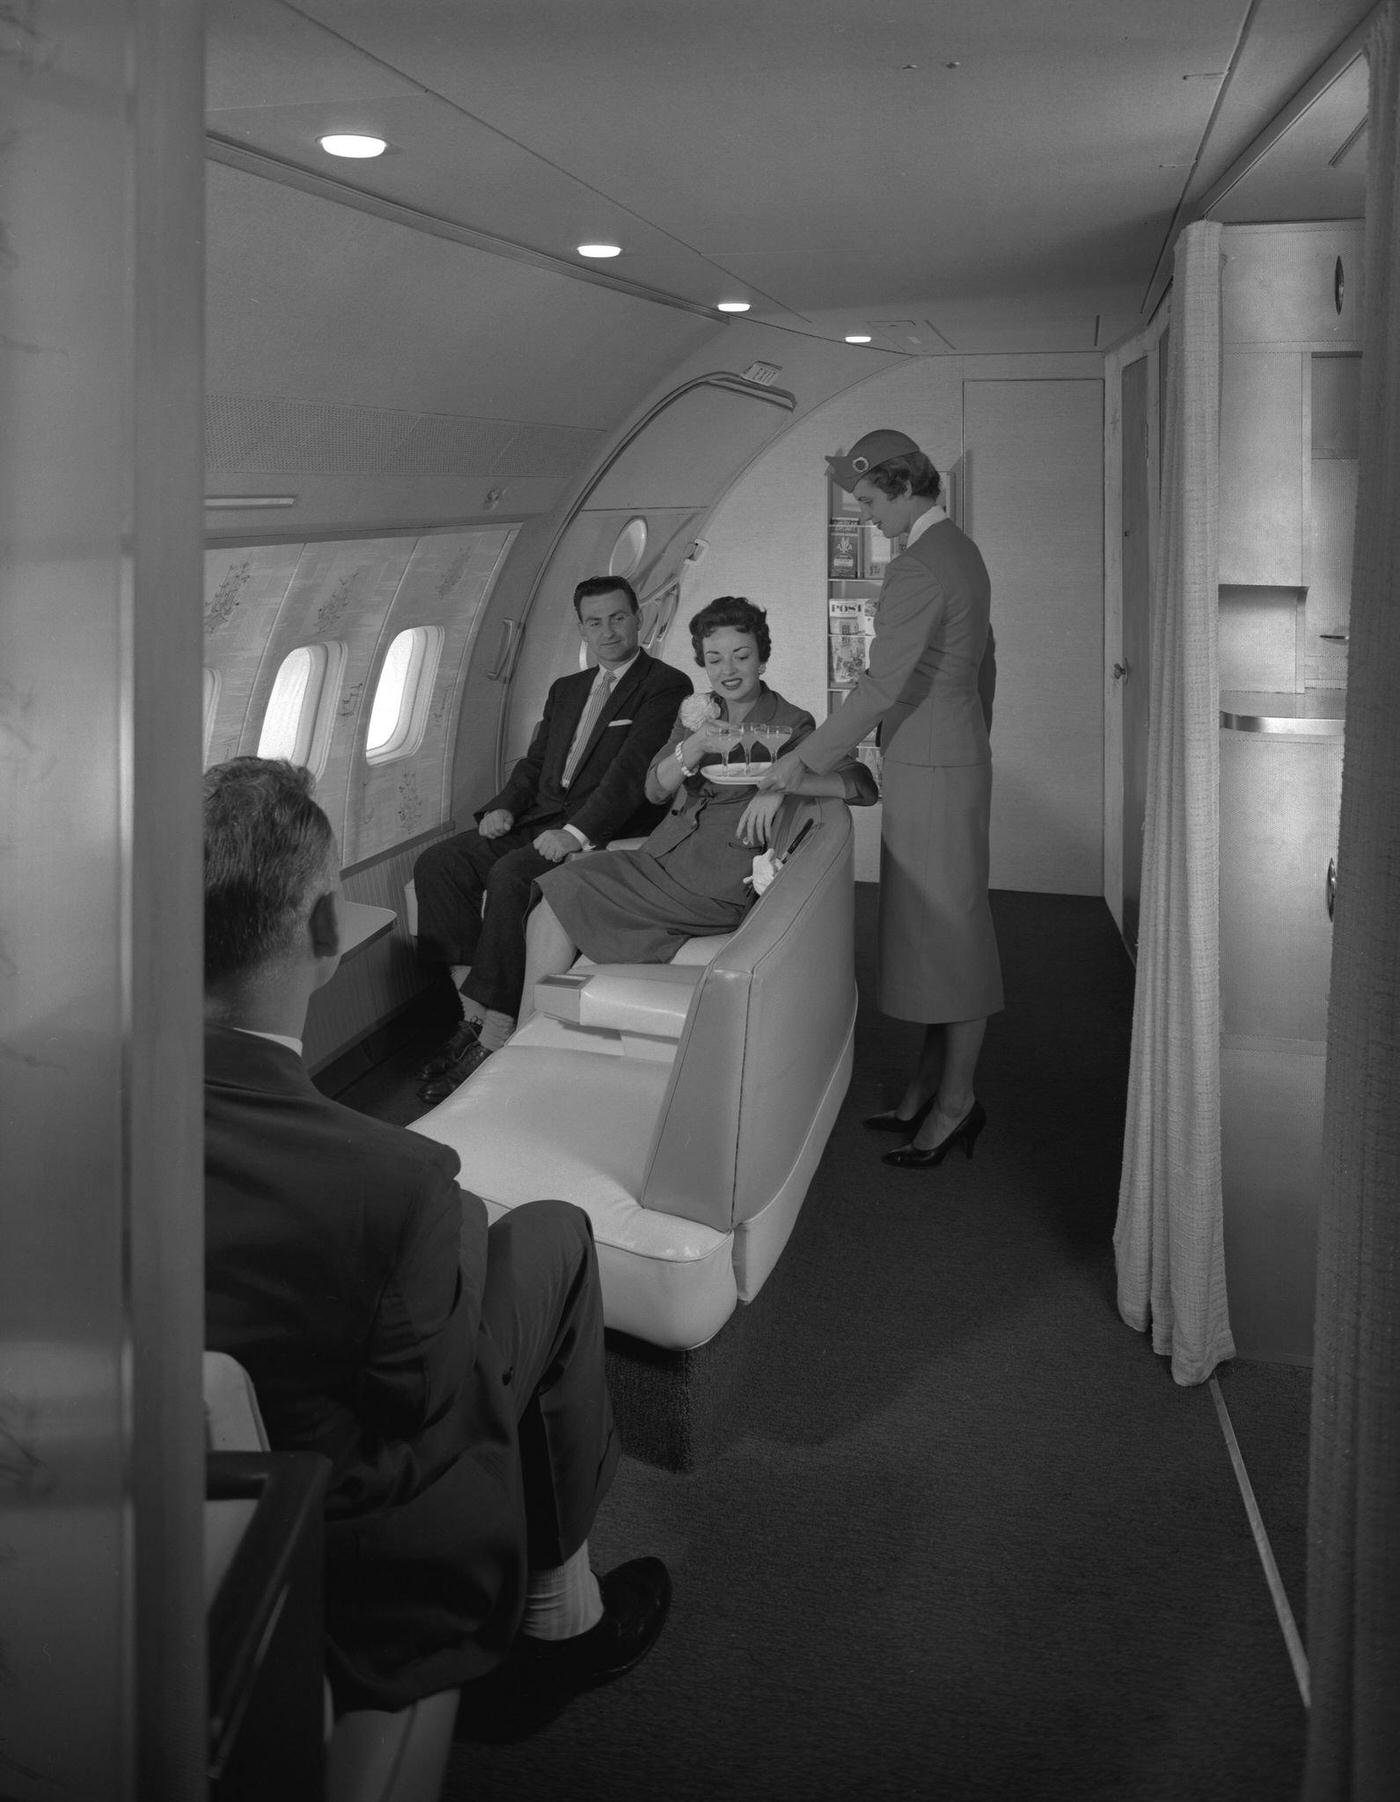 An attentive air hostess serves passengers in the observation area of a Transocean Air Lines Boeing 377 Stratocruiser during a flight in the mid 1950s.